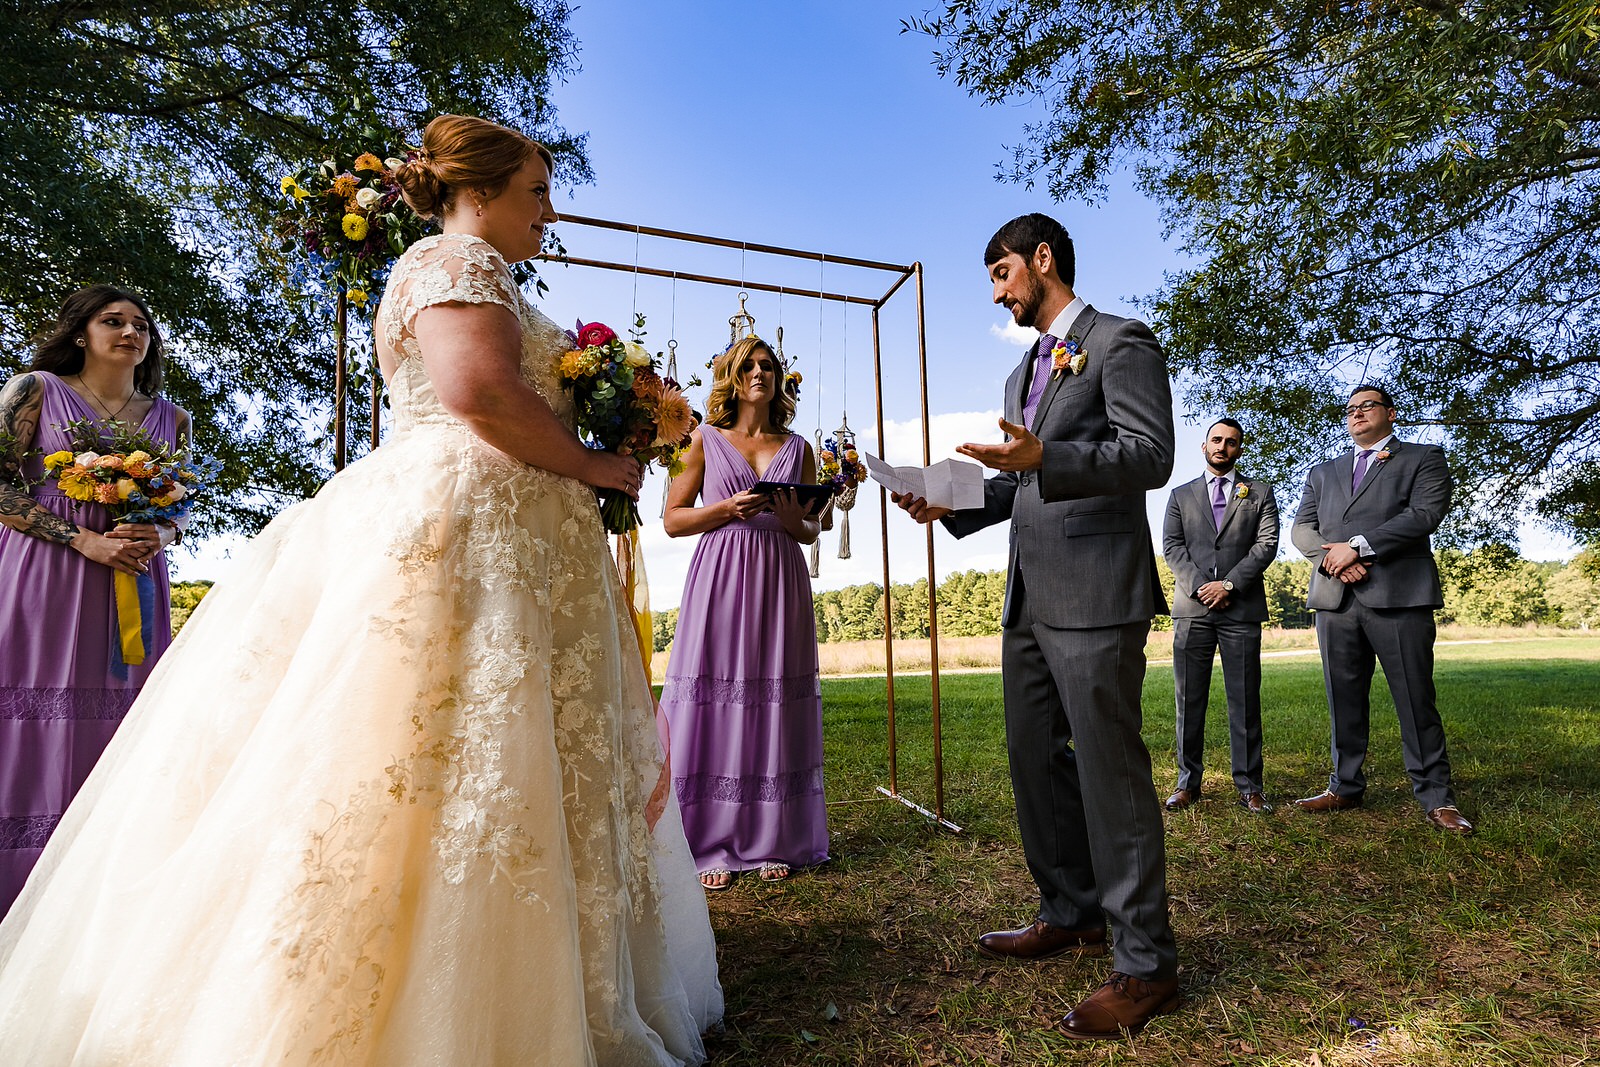 Groom reads his personal vows during outdoor wedding ceremony